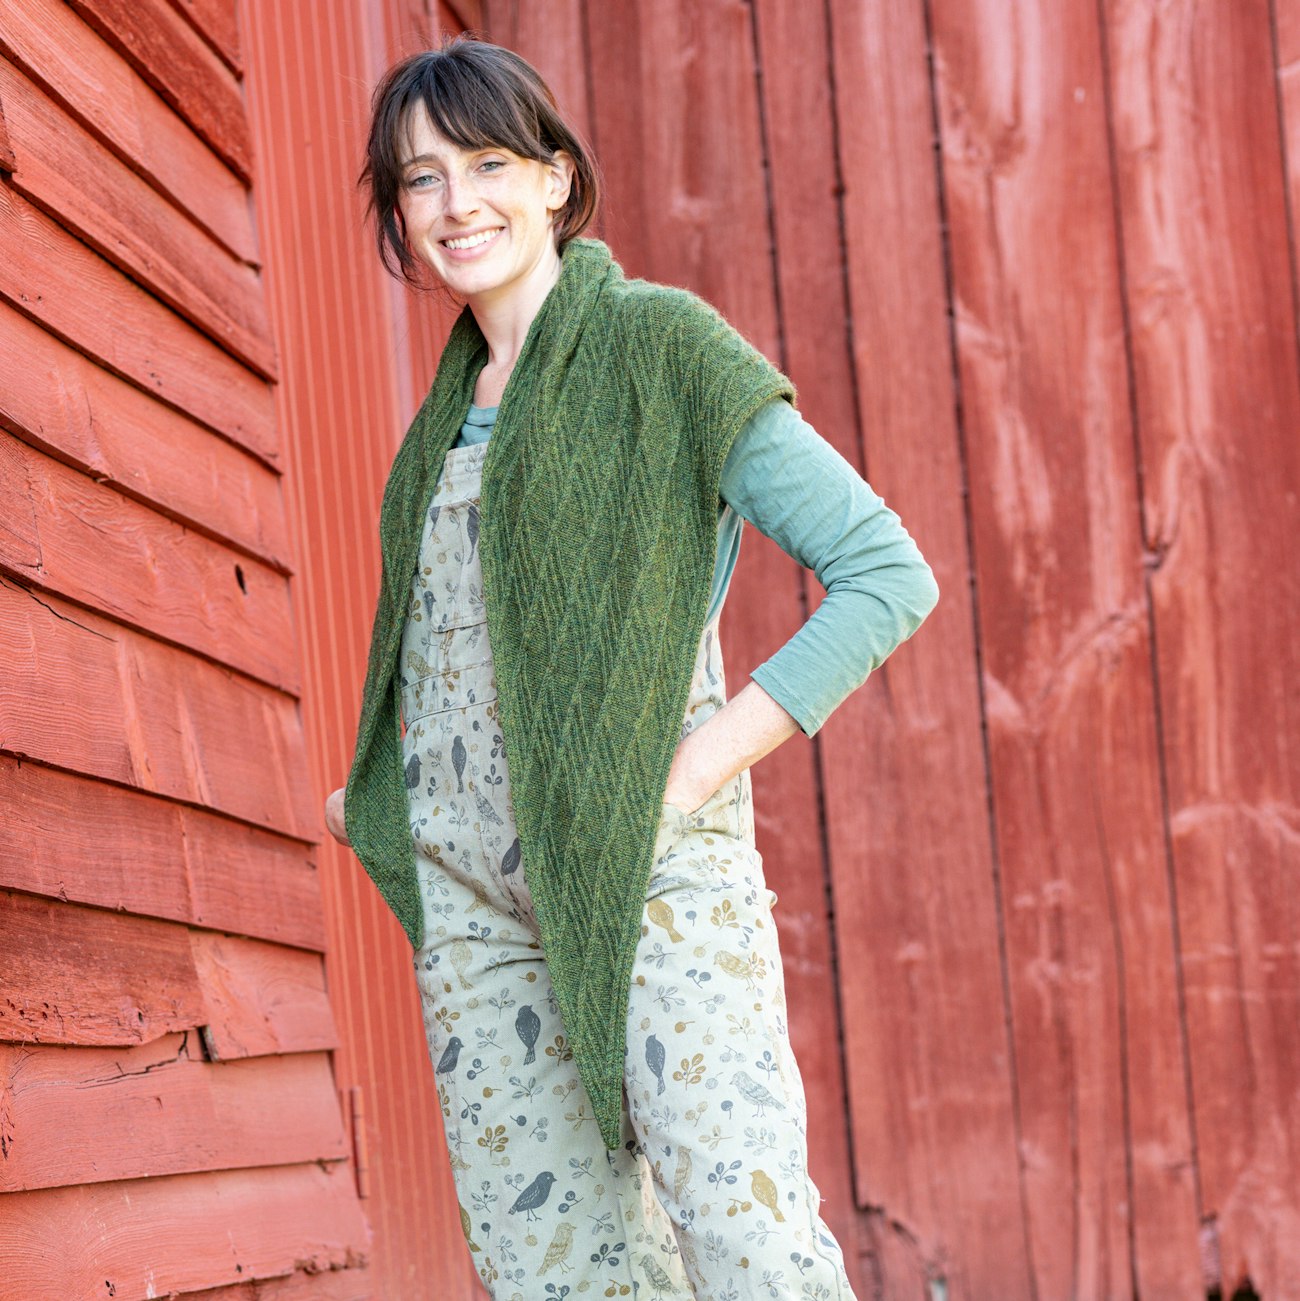 Woman with brown hair wearing dark green knitted shawl standing against red barn